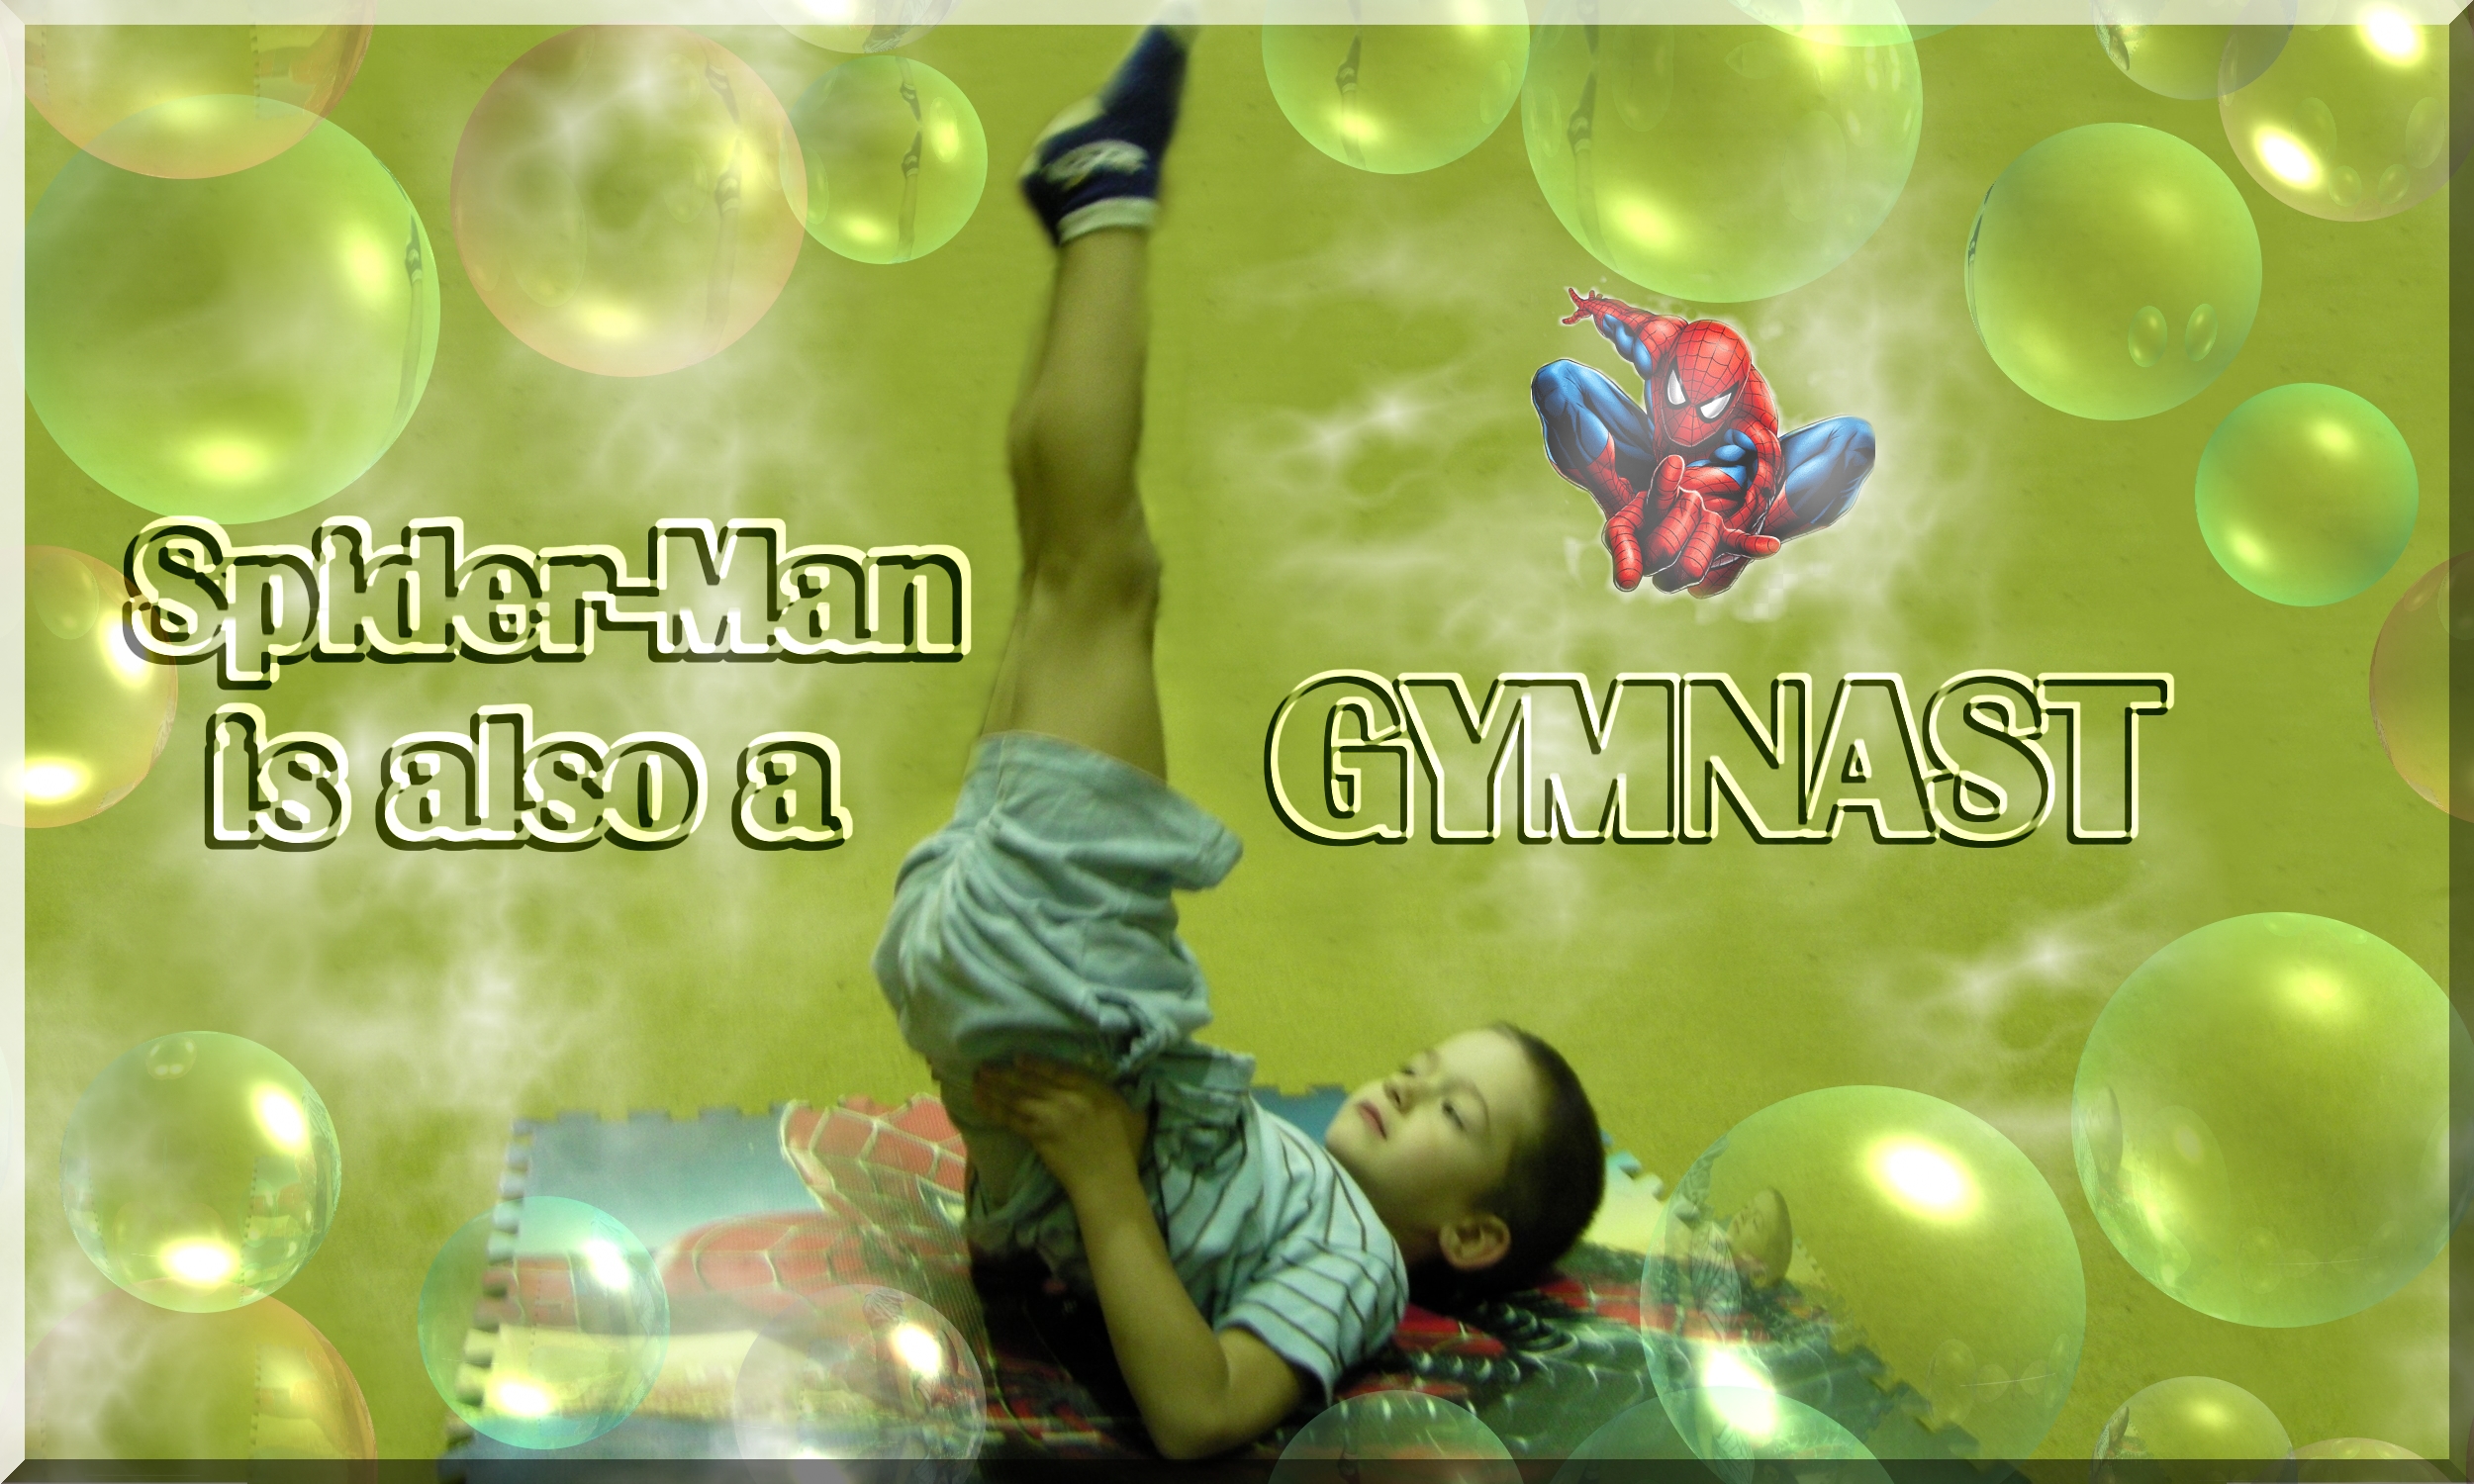 General Gymnastics For Children - From Beginners to Intermediate